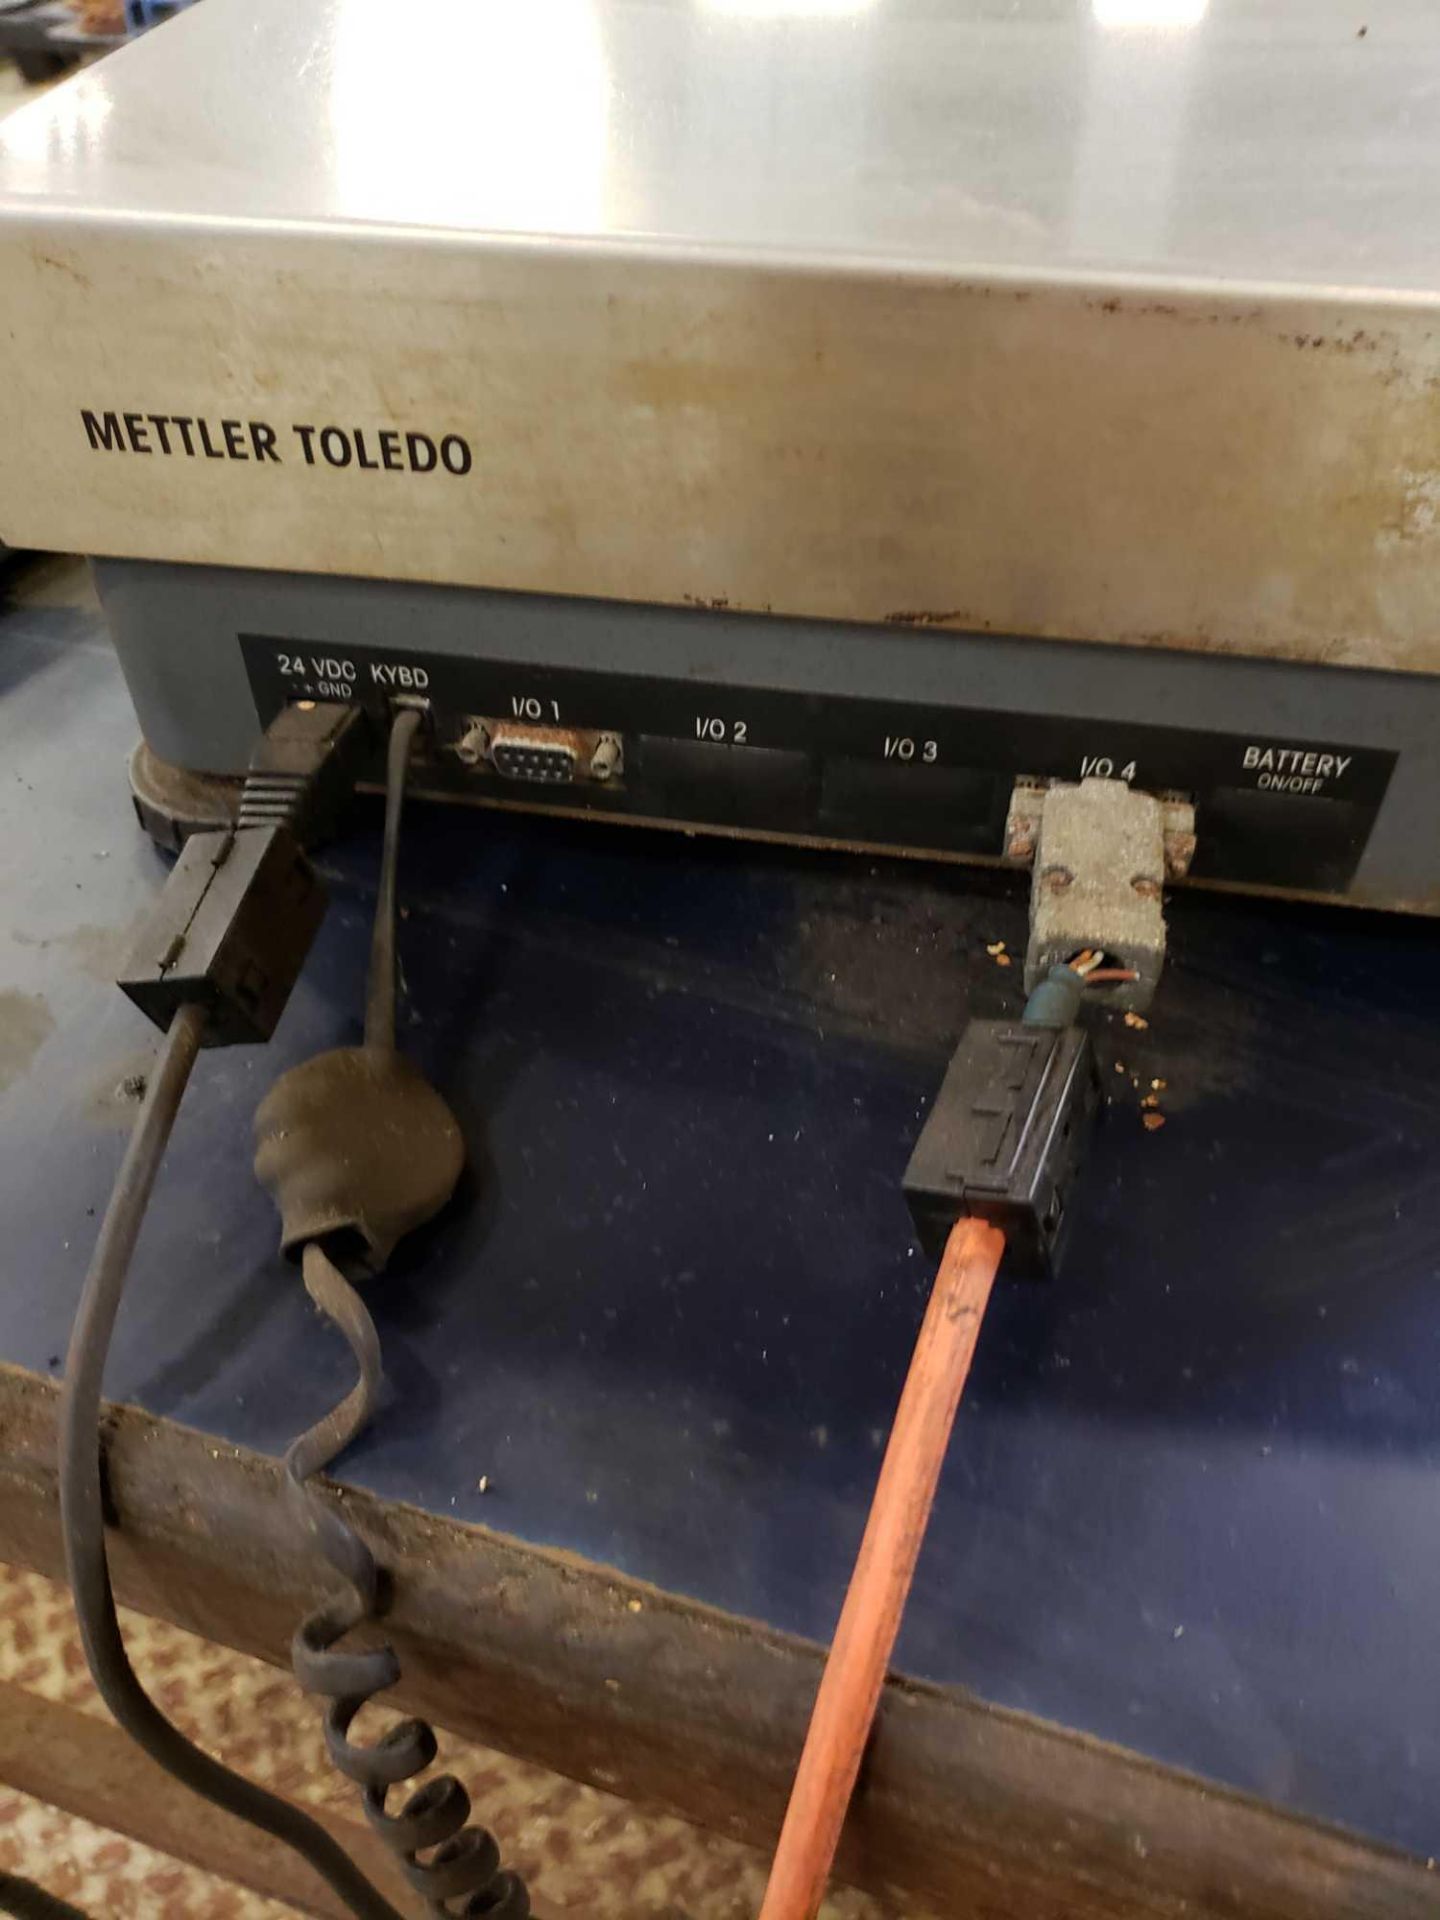 Mettler Toledo Platform shipping scale with tabletop unit included. SC30 digital read out. - Image 4 of 5